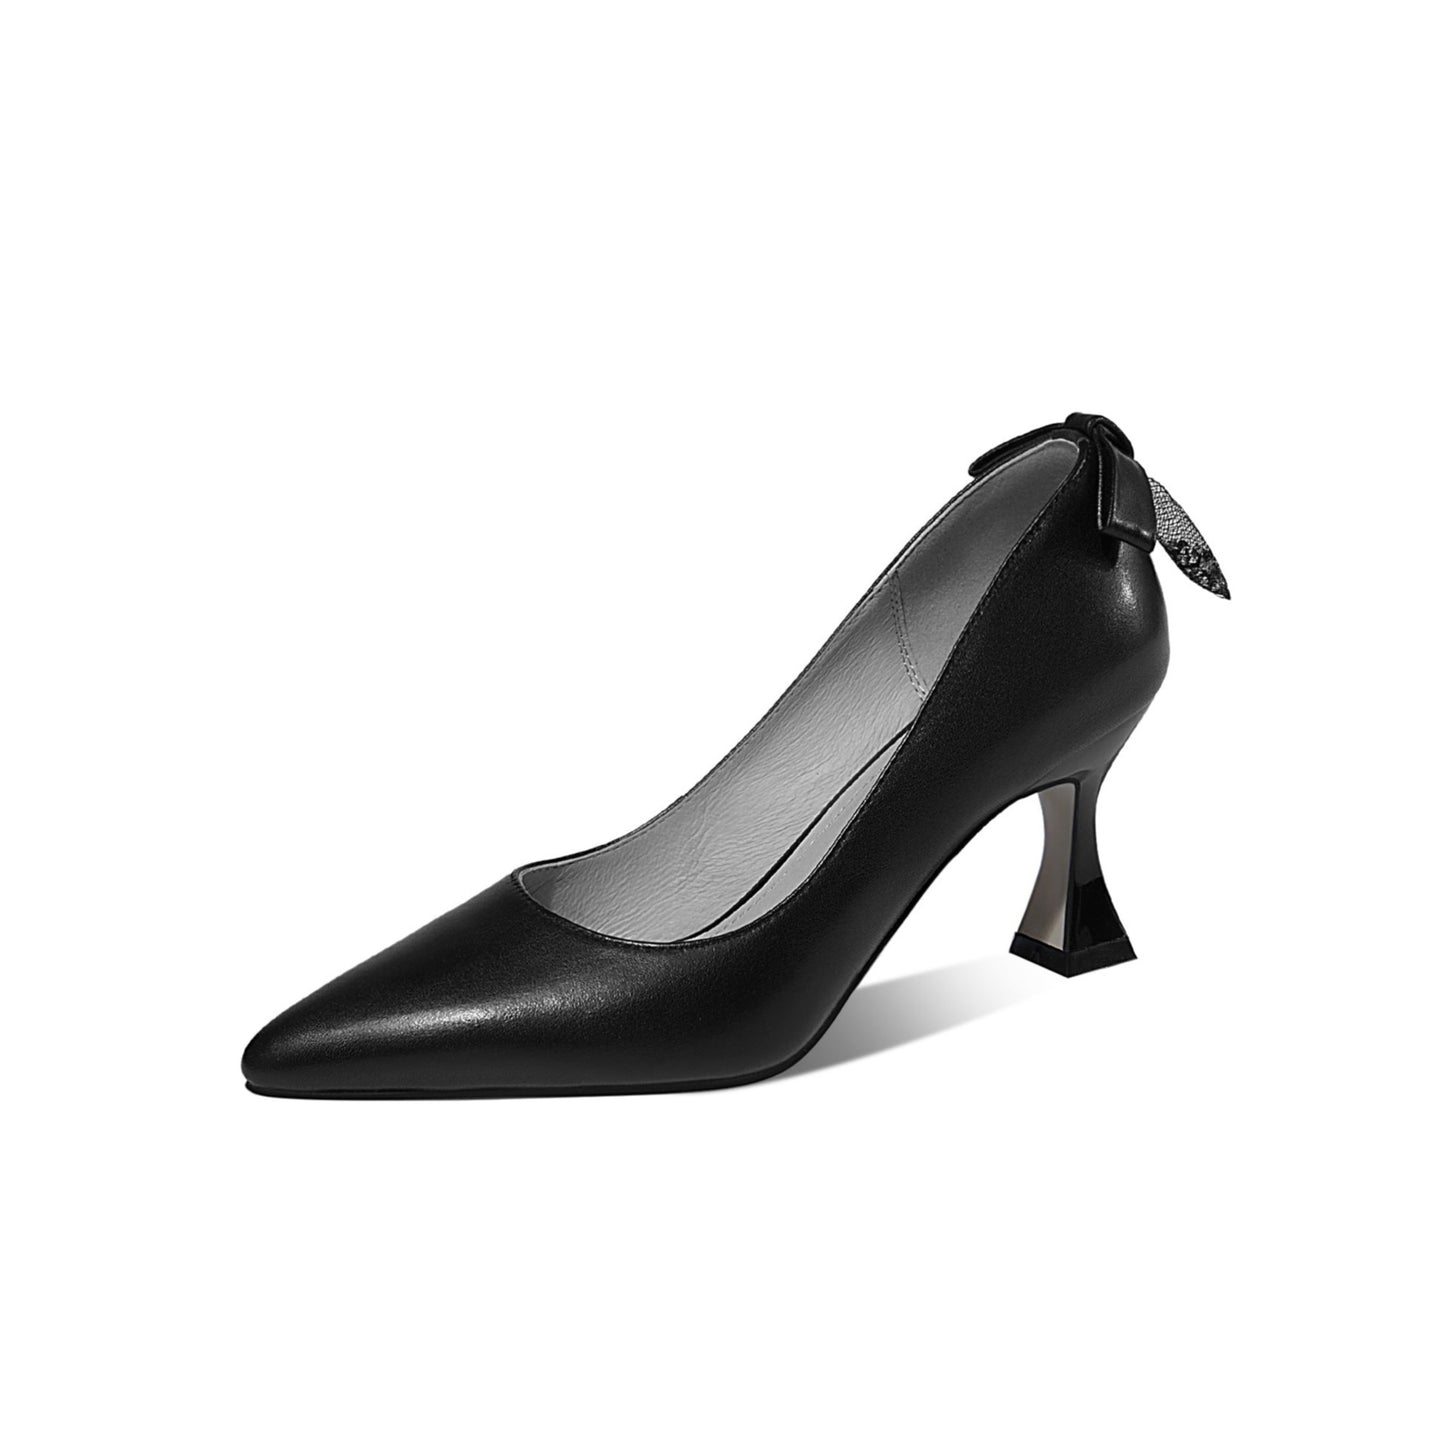 TinaCus Women's Genuine Leather Handmade Pointed Toe Slip On Sexy High Spool Heel Elegant Pump Shoes with Unique Back Bowtie